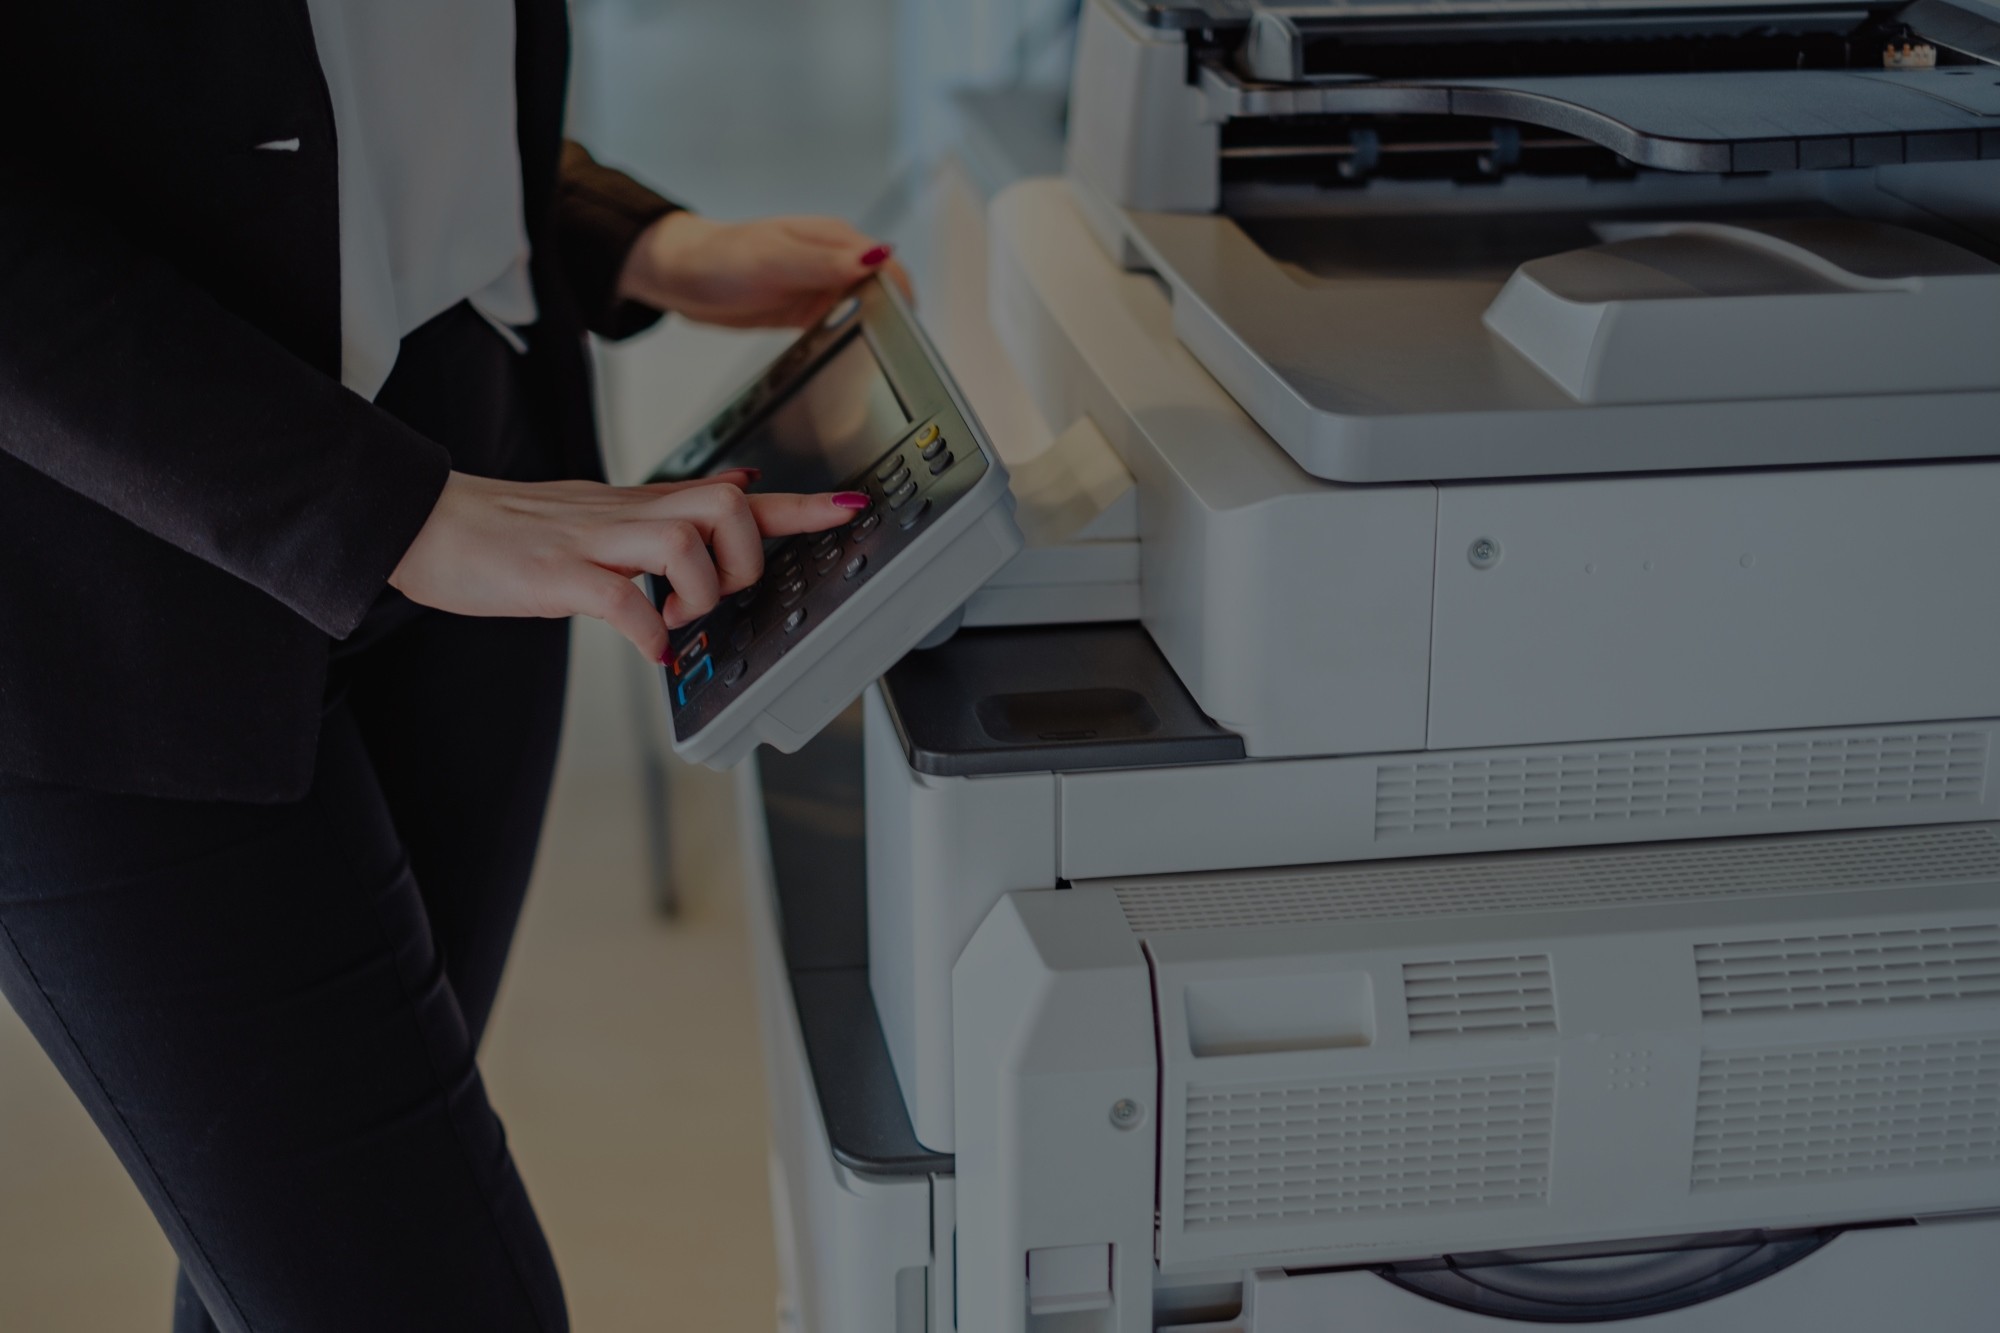 printers can be your company's biggest security risk woman using office printer